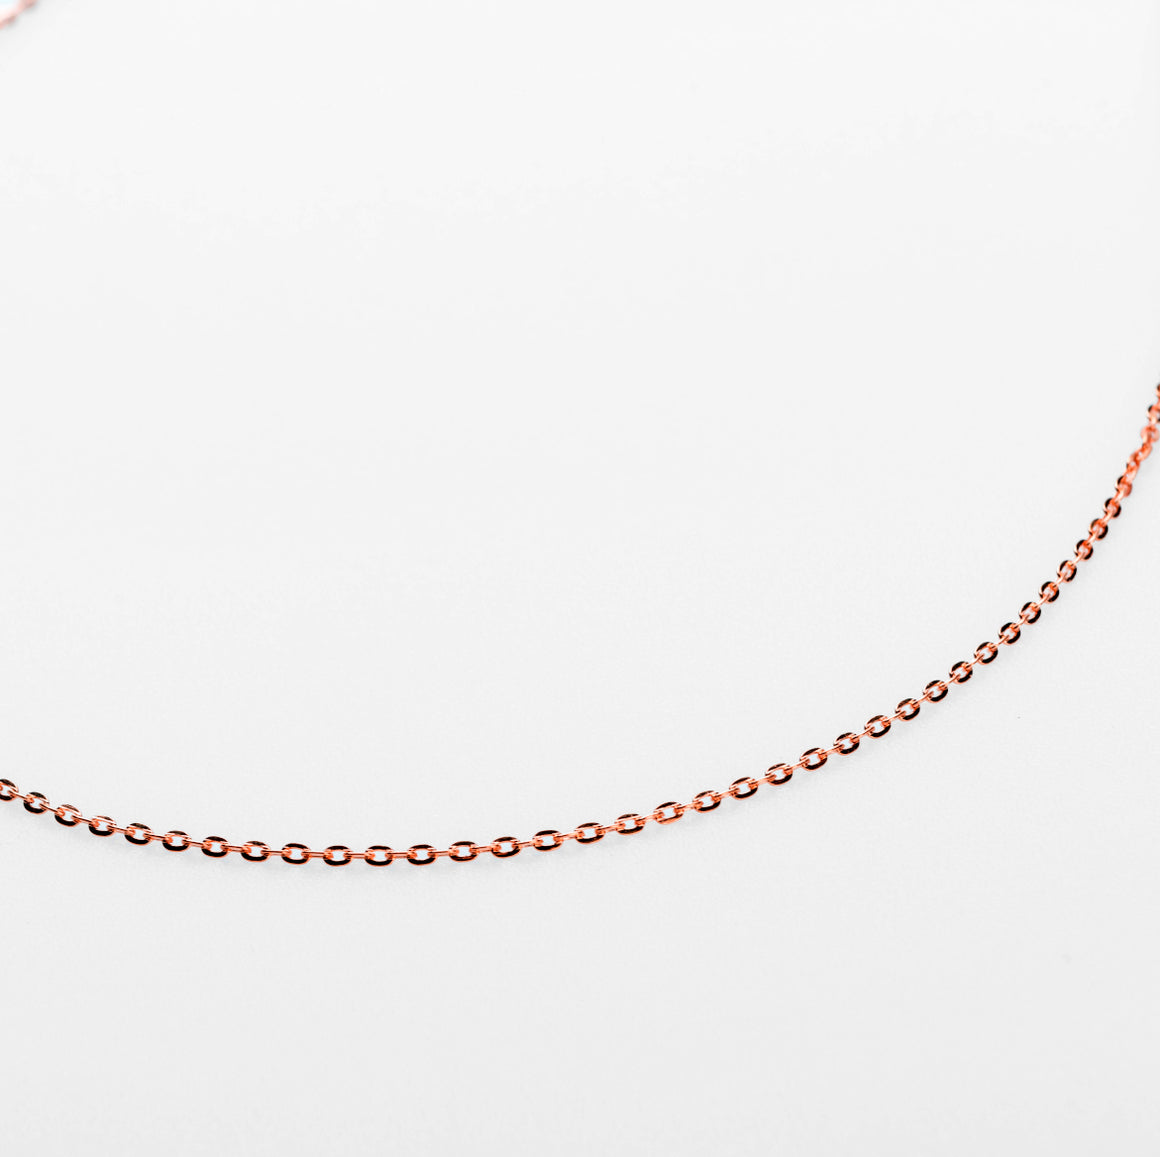 54 FLORAL 2mm CURB NECKLACE CHAIN - ROSE GOLD